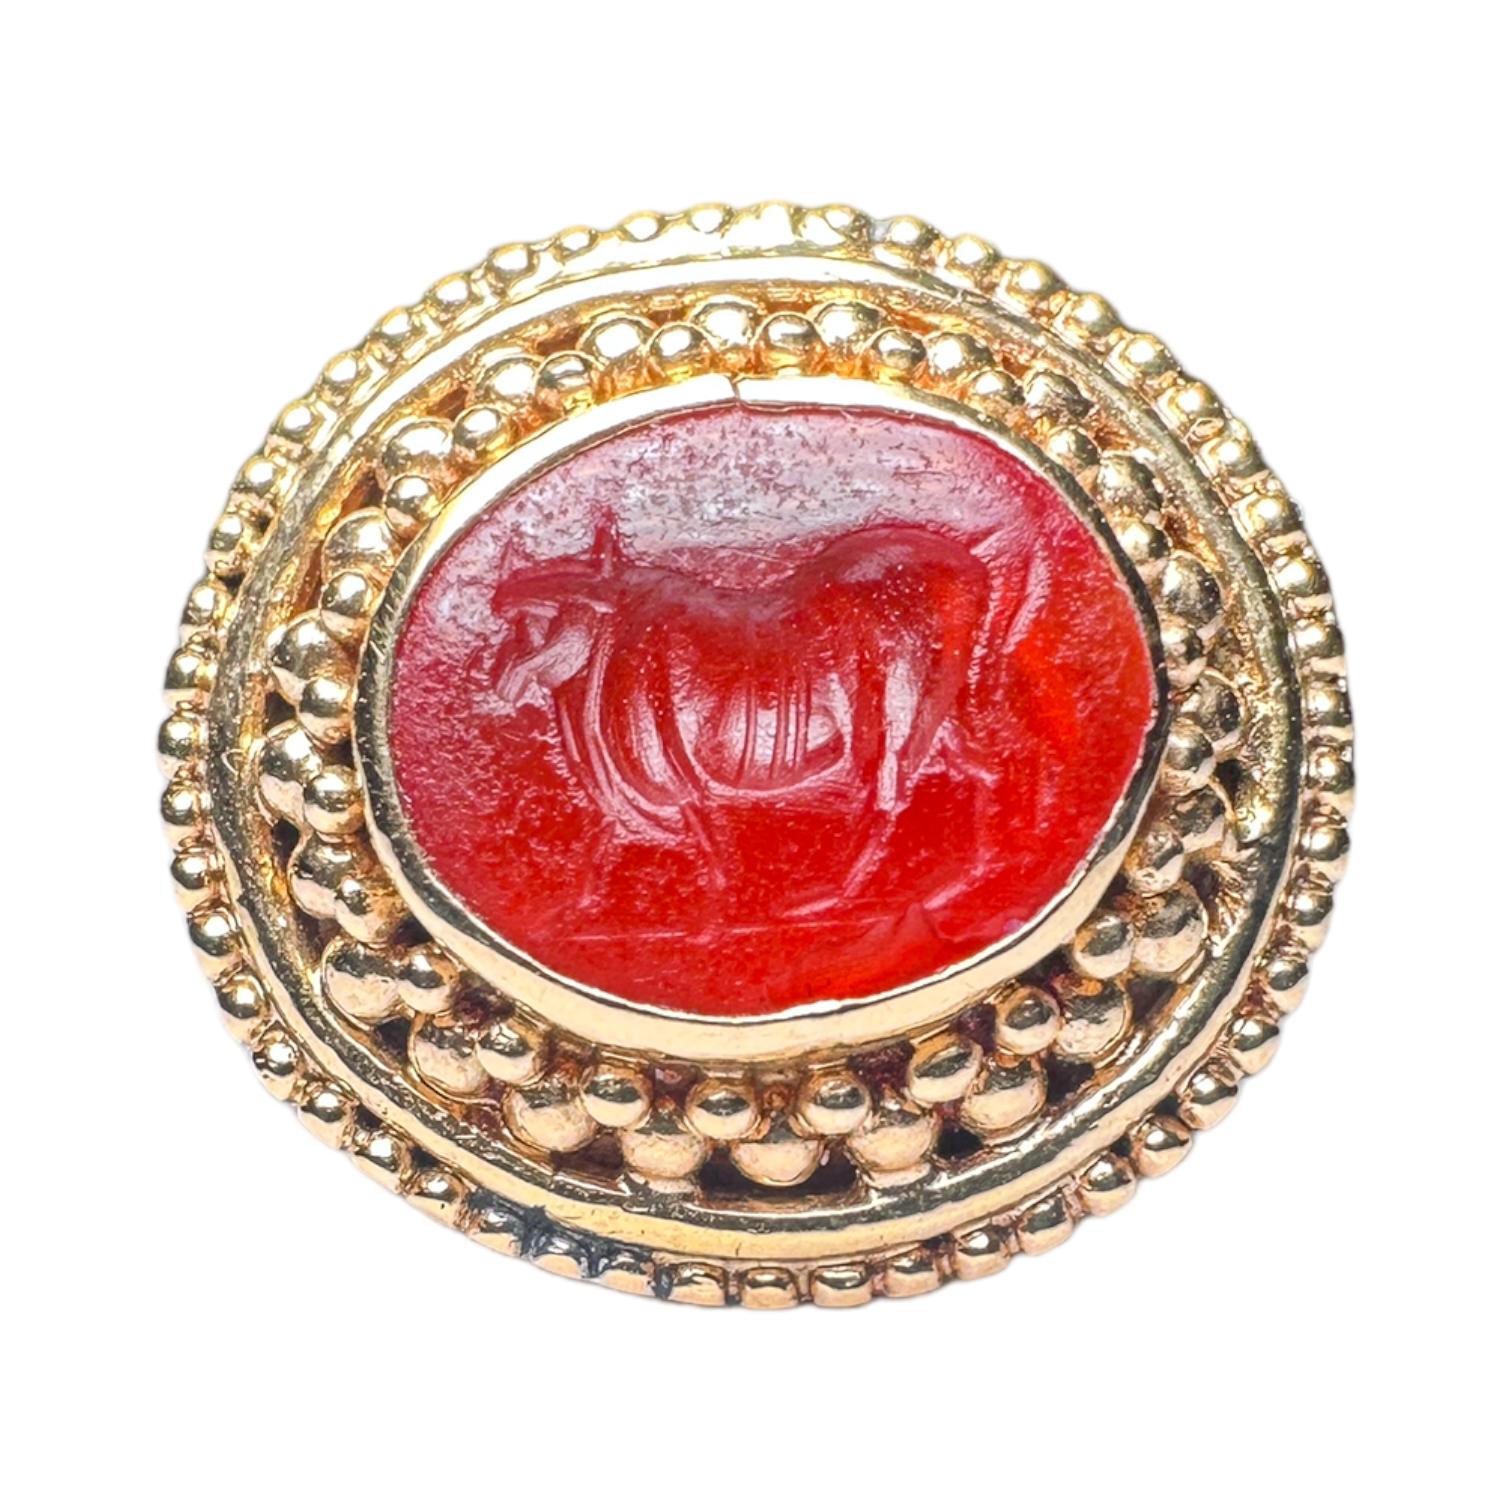 Women's or Men's 18K Gold Roman Intaglio Ring with Bull Signet For Sale